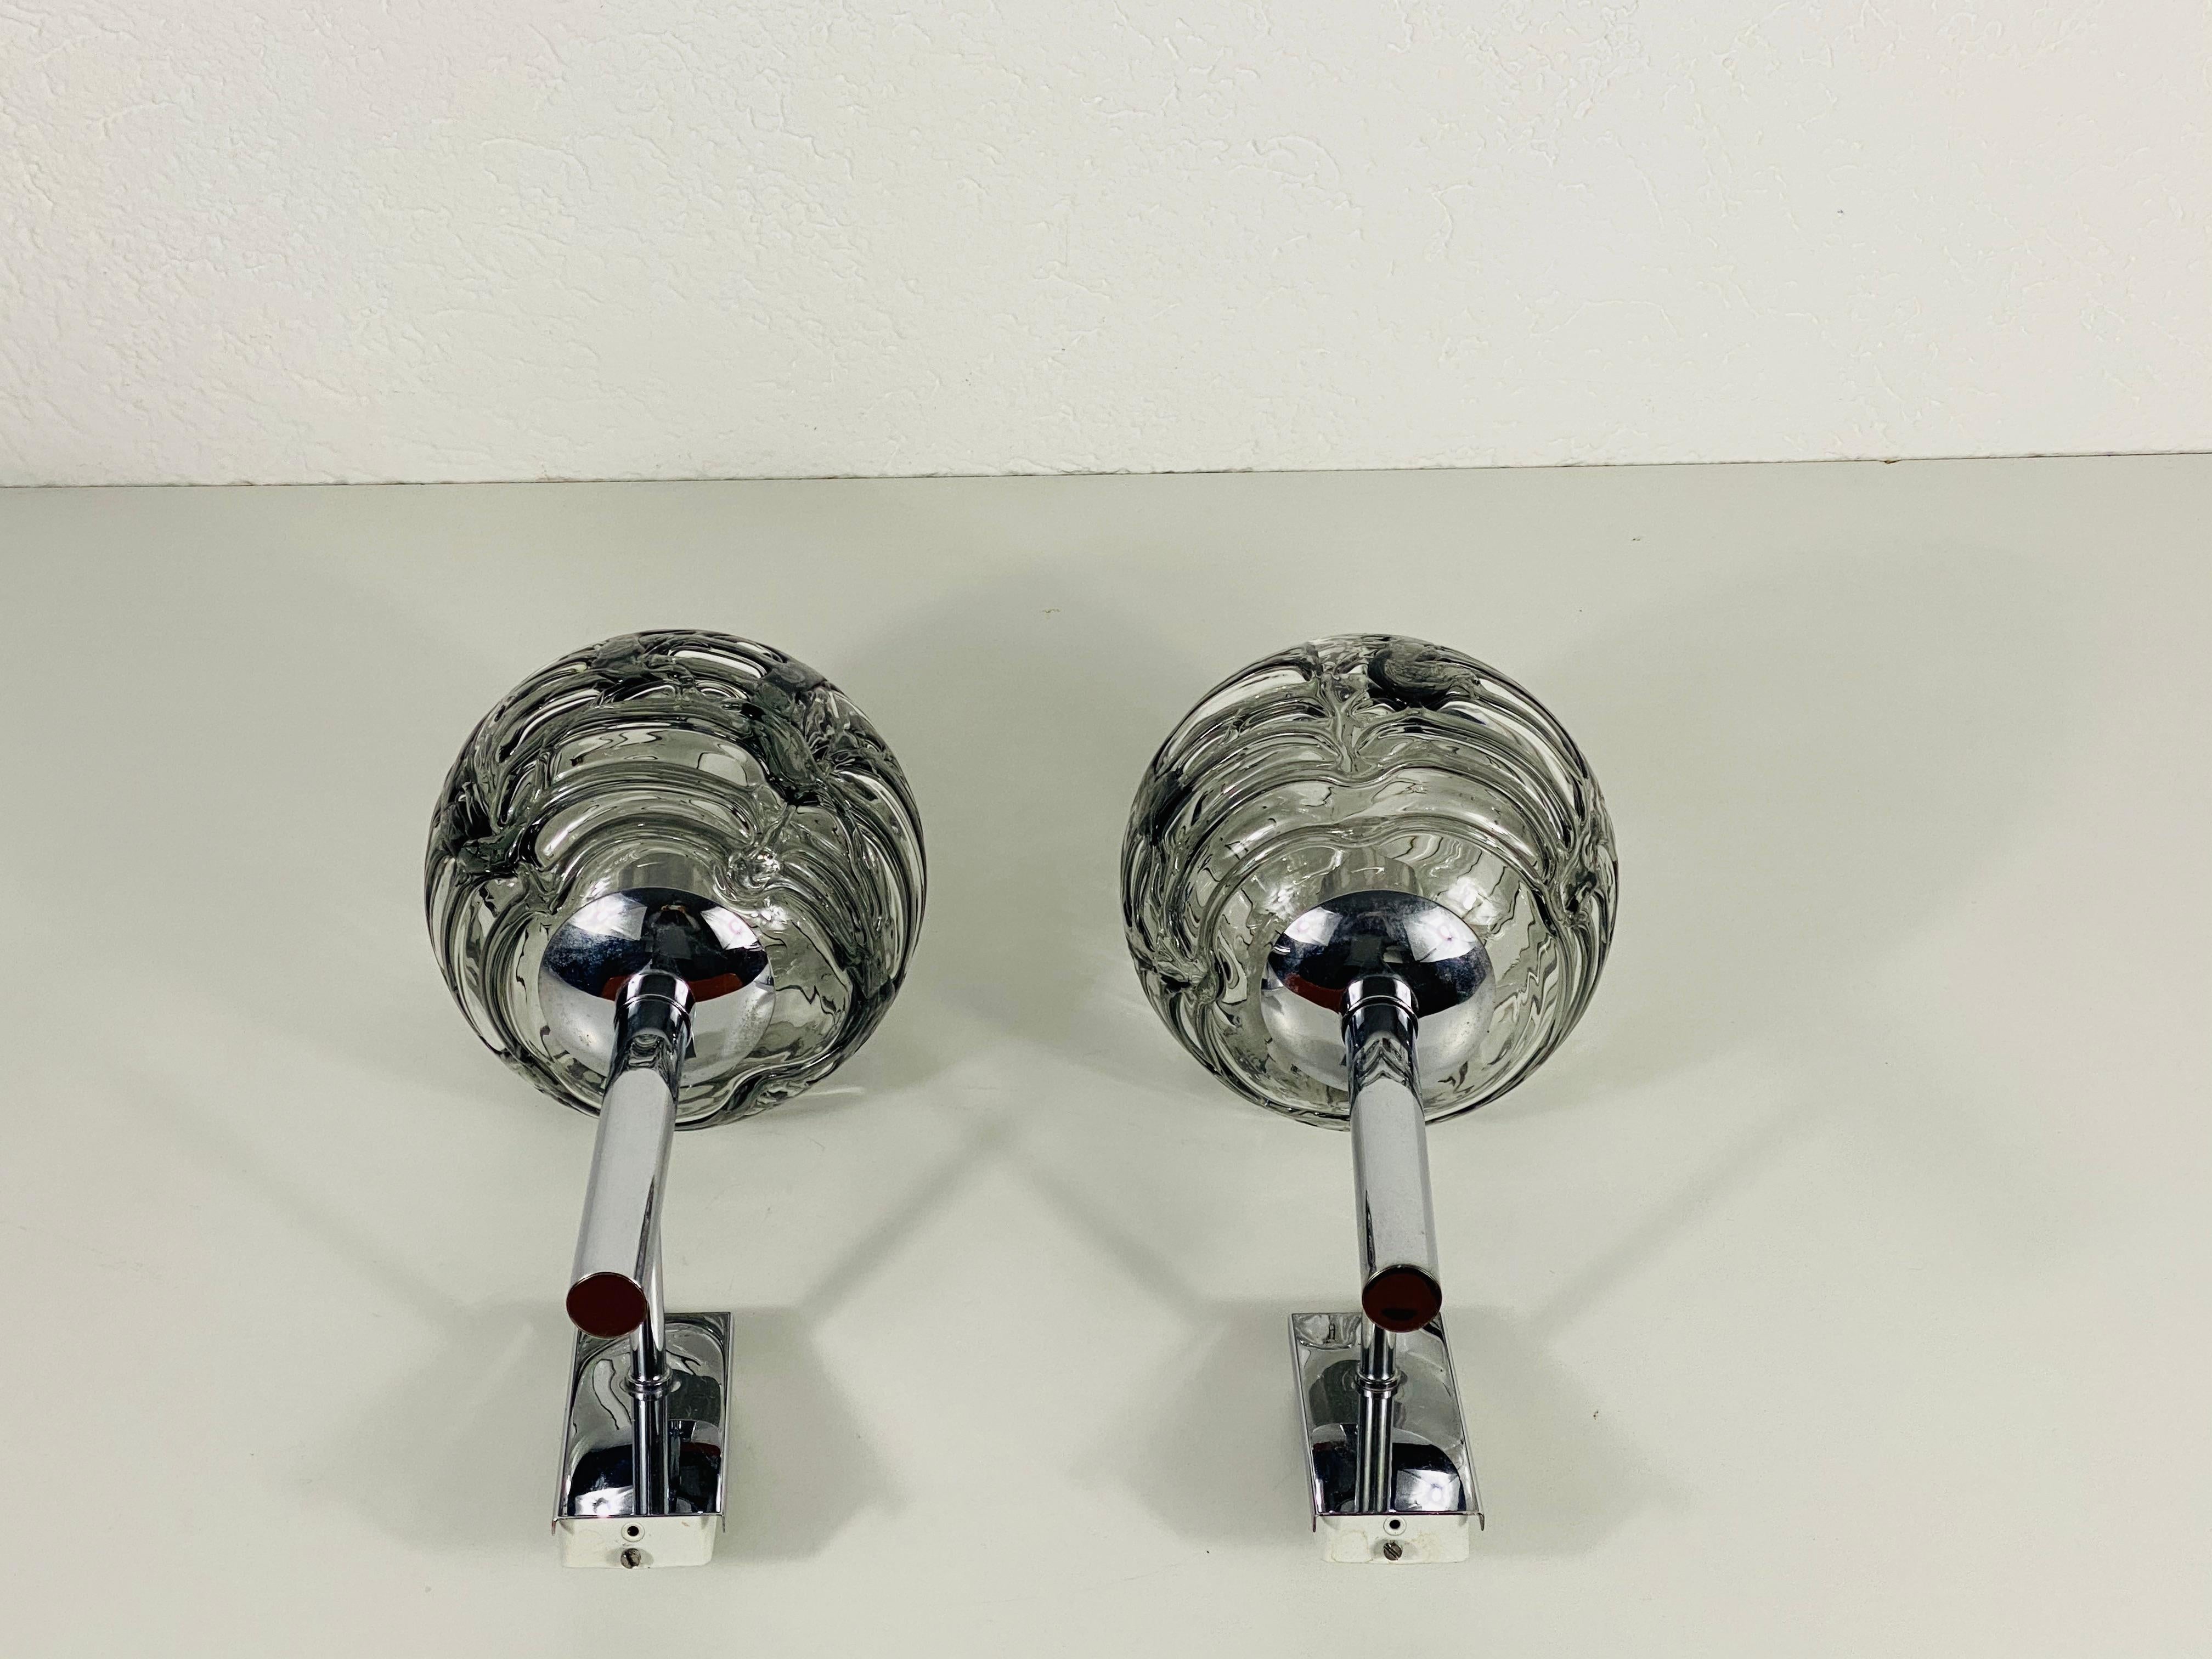 Brass Midcentury Pair of Chrome and Glass Wall Lamps by Doria, 1960s